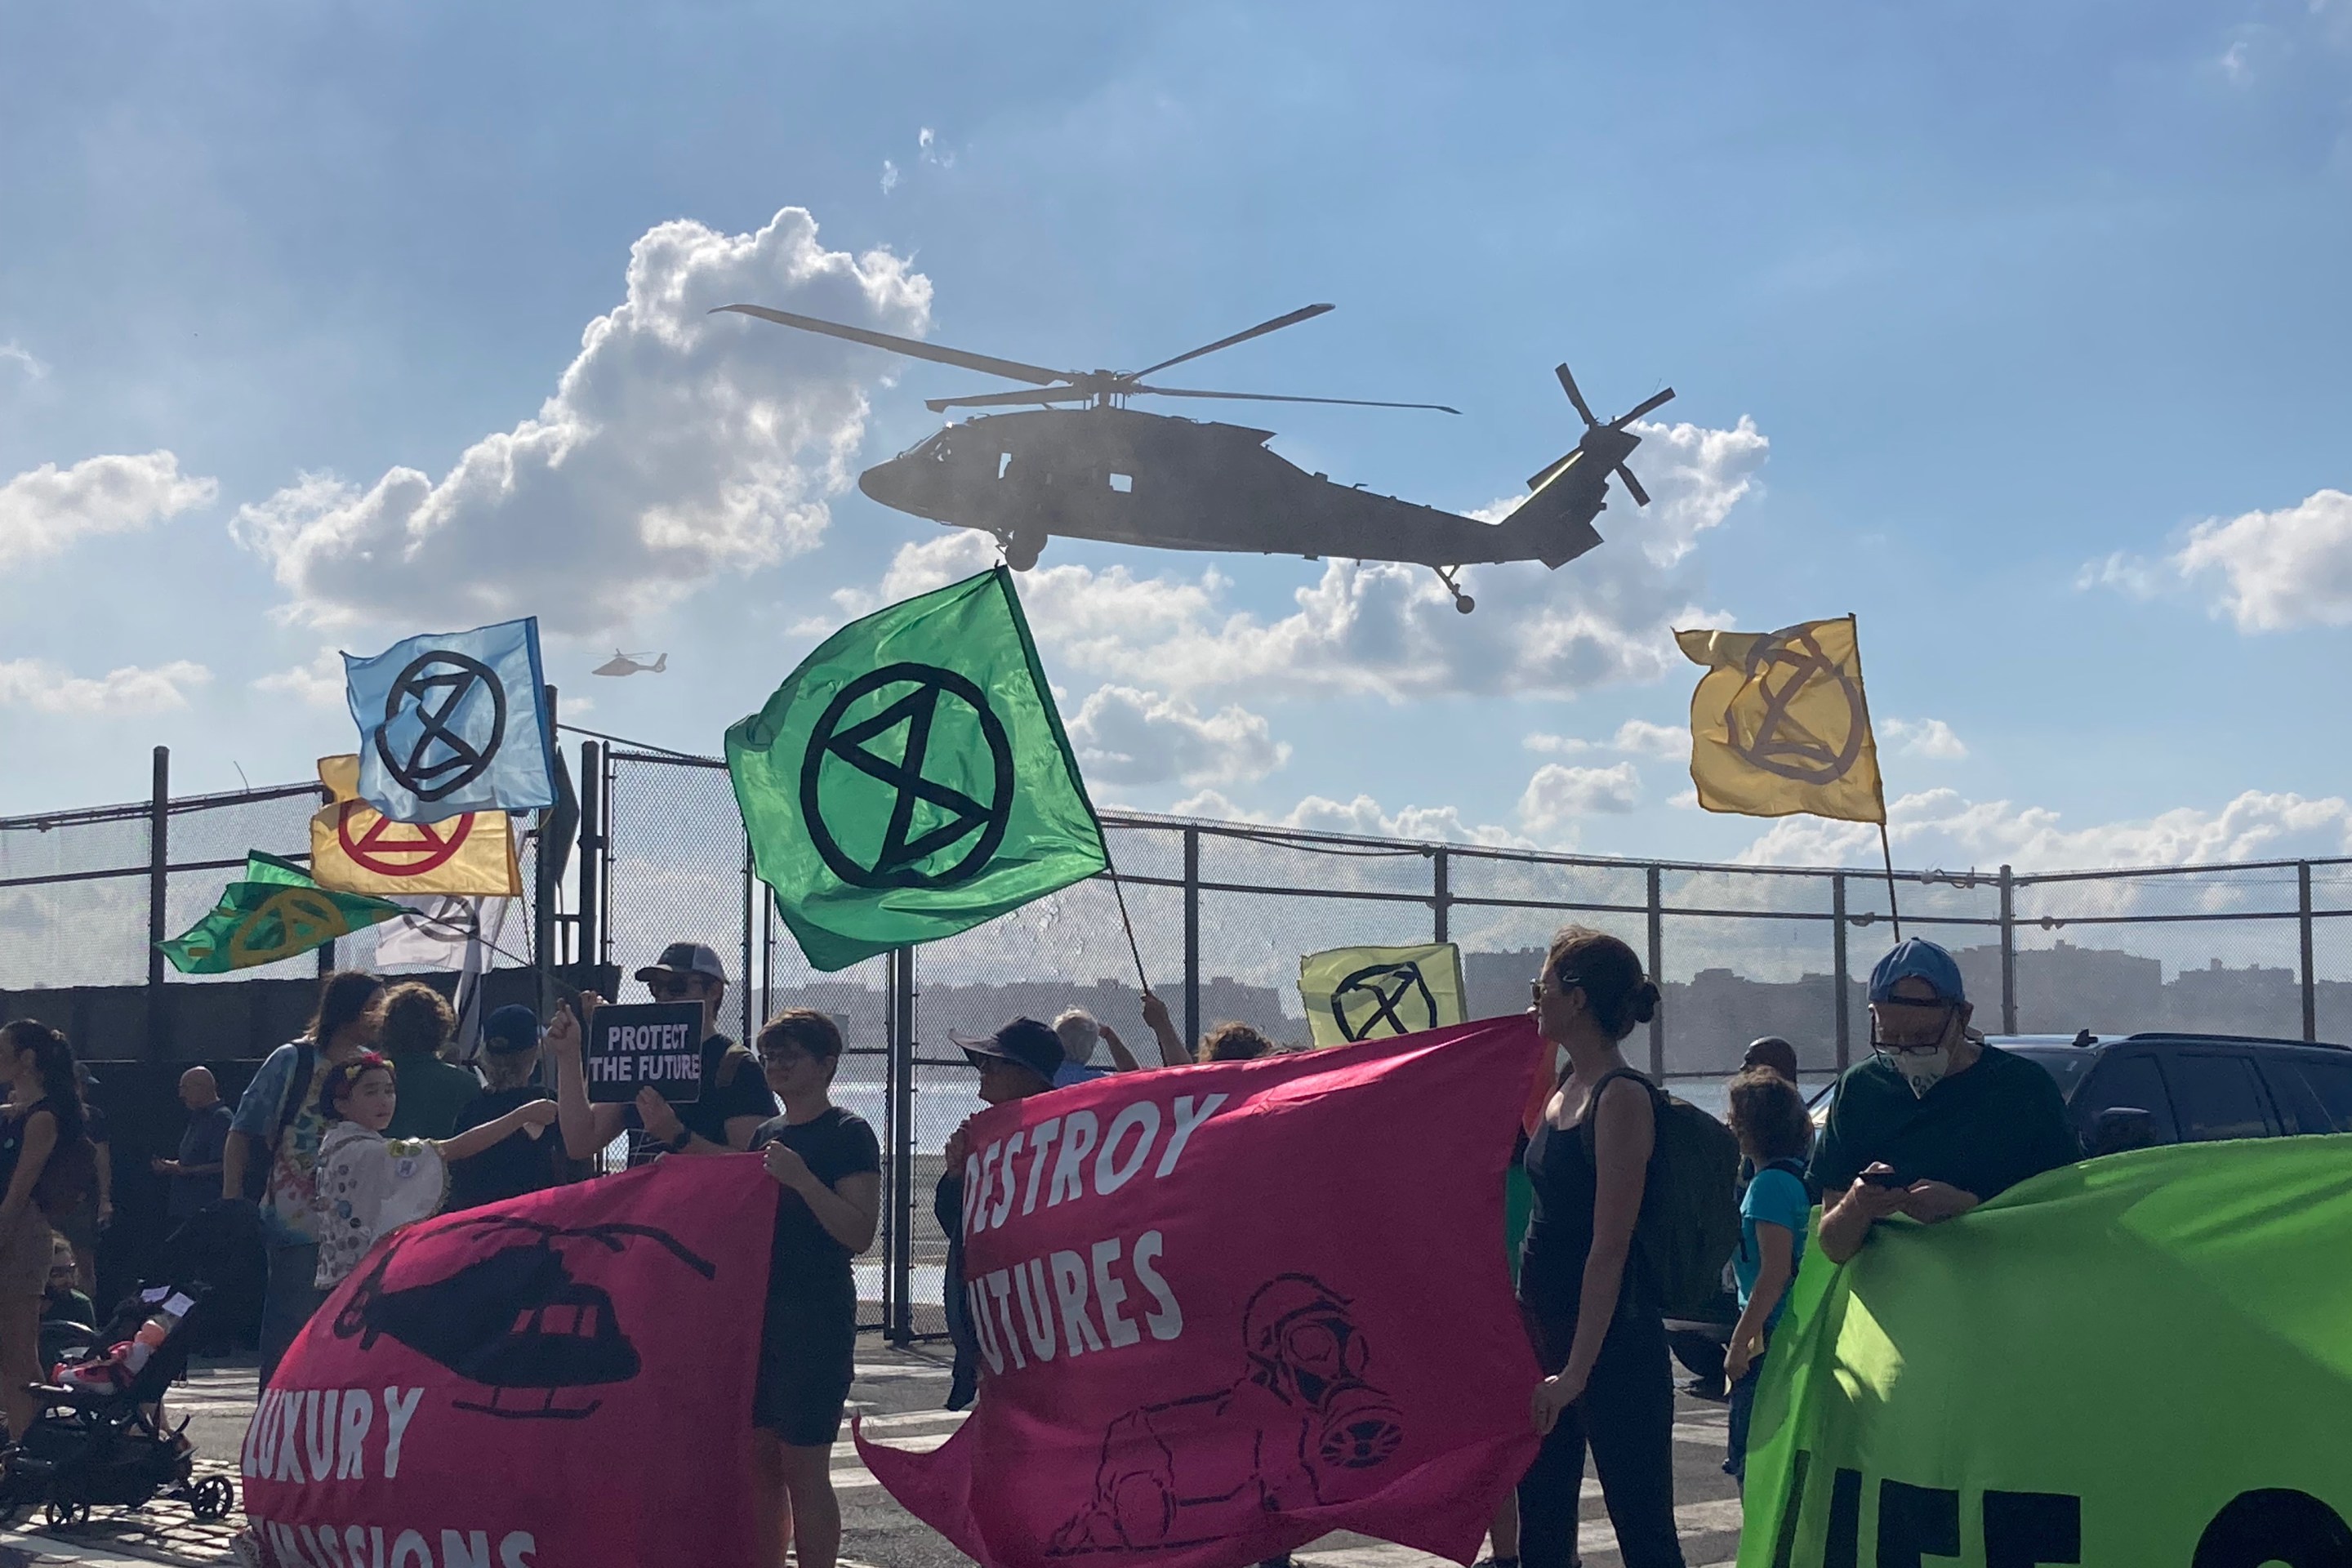 Protesters' banners flap in the prop-wash of a helicopter.